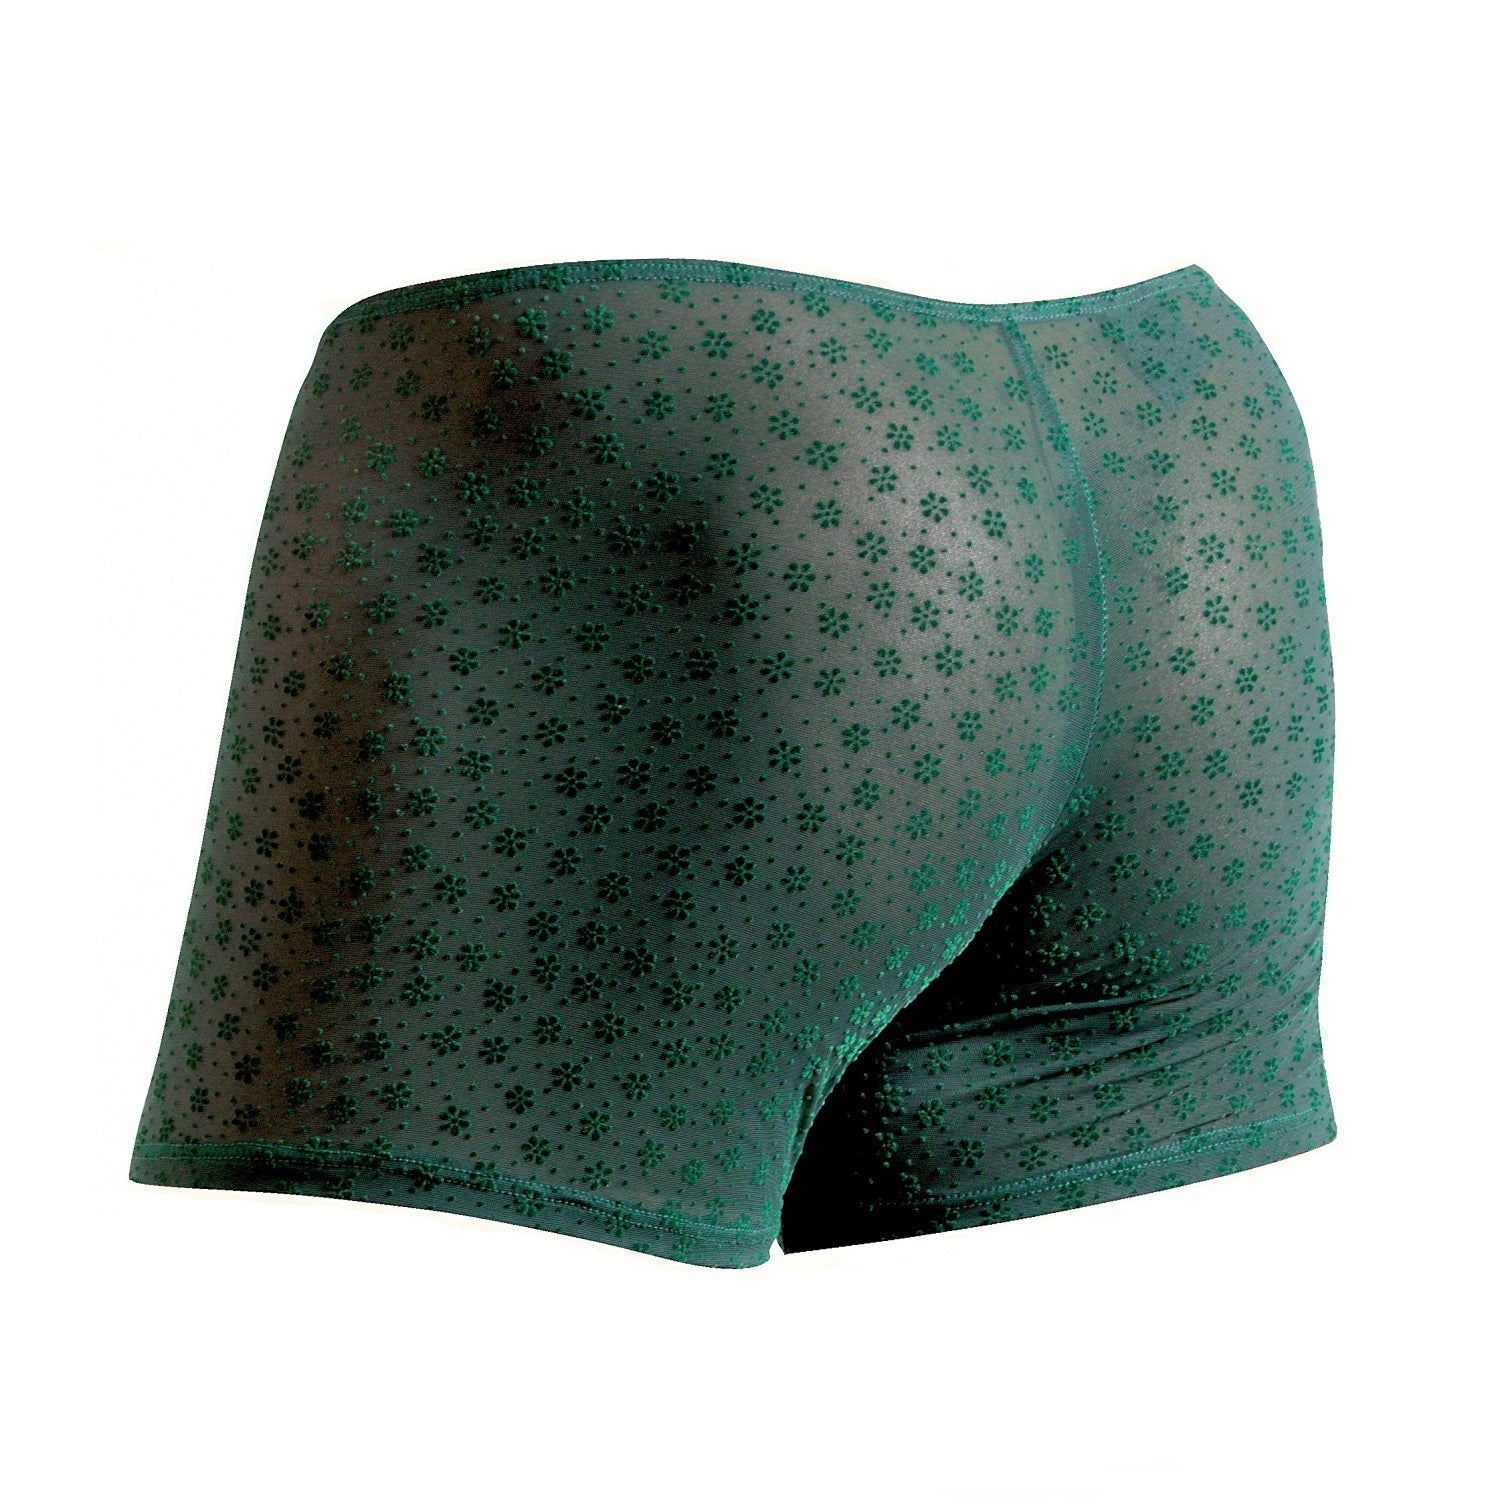 The Etseo Pattern Boxer Brief Green is part of the Etseo Pattern Men's Underwear Collection of Boxer Briefs. Etseo Pattern was created to make a difference. Beautiful, light green fabric sprinkled with patterns in a darker green. Products that are a must have. At Etseo we manufacture quality men's underwear.